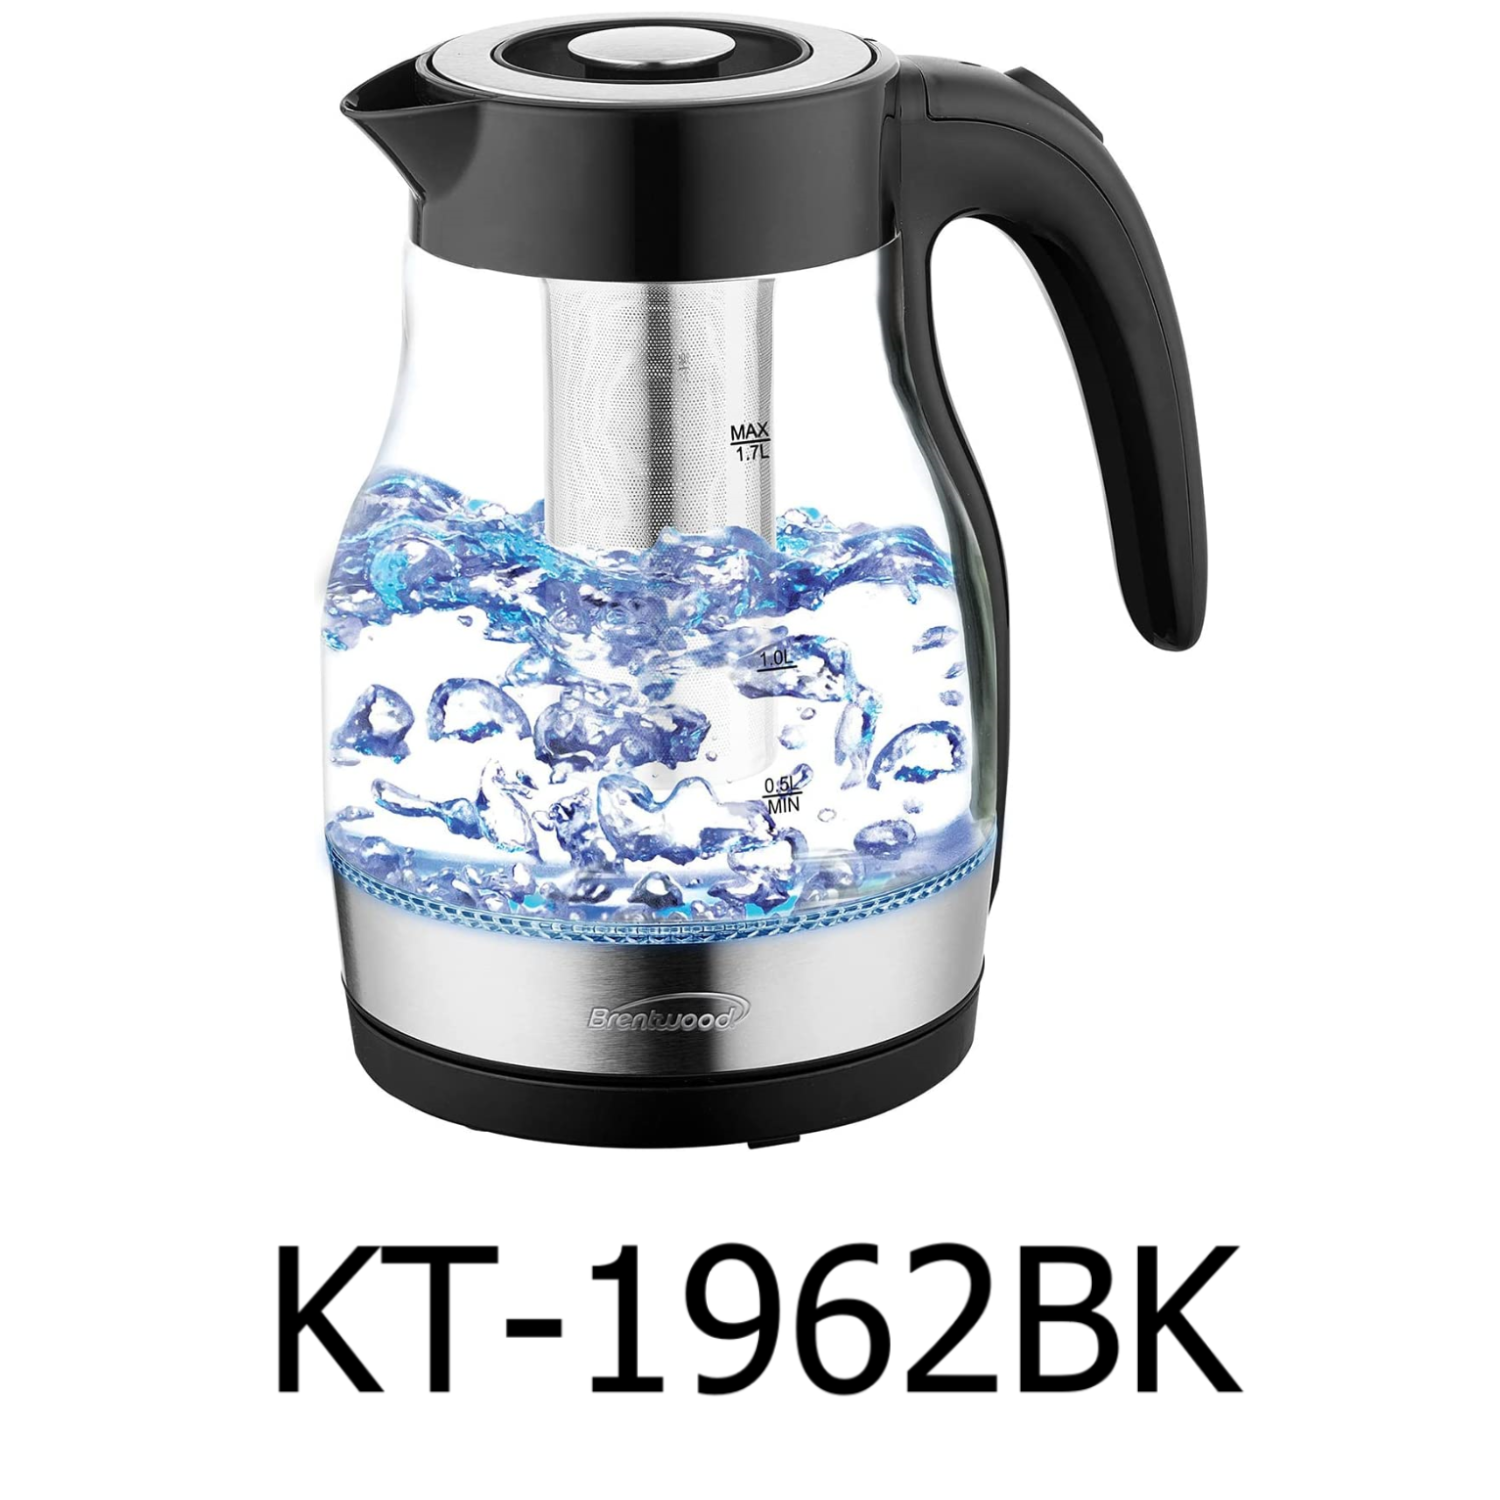 Brentwood Cordless Electric Kettle BPA Free, 1 Liter, White